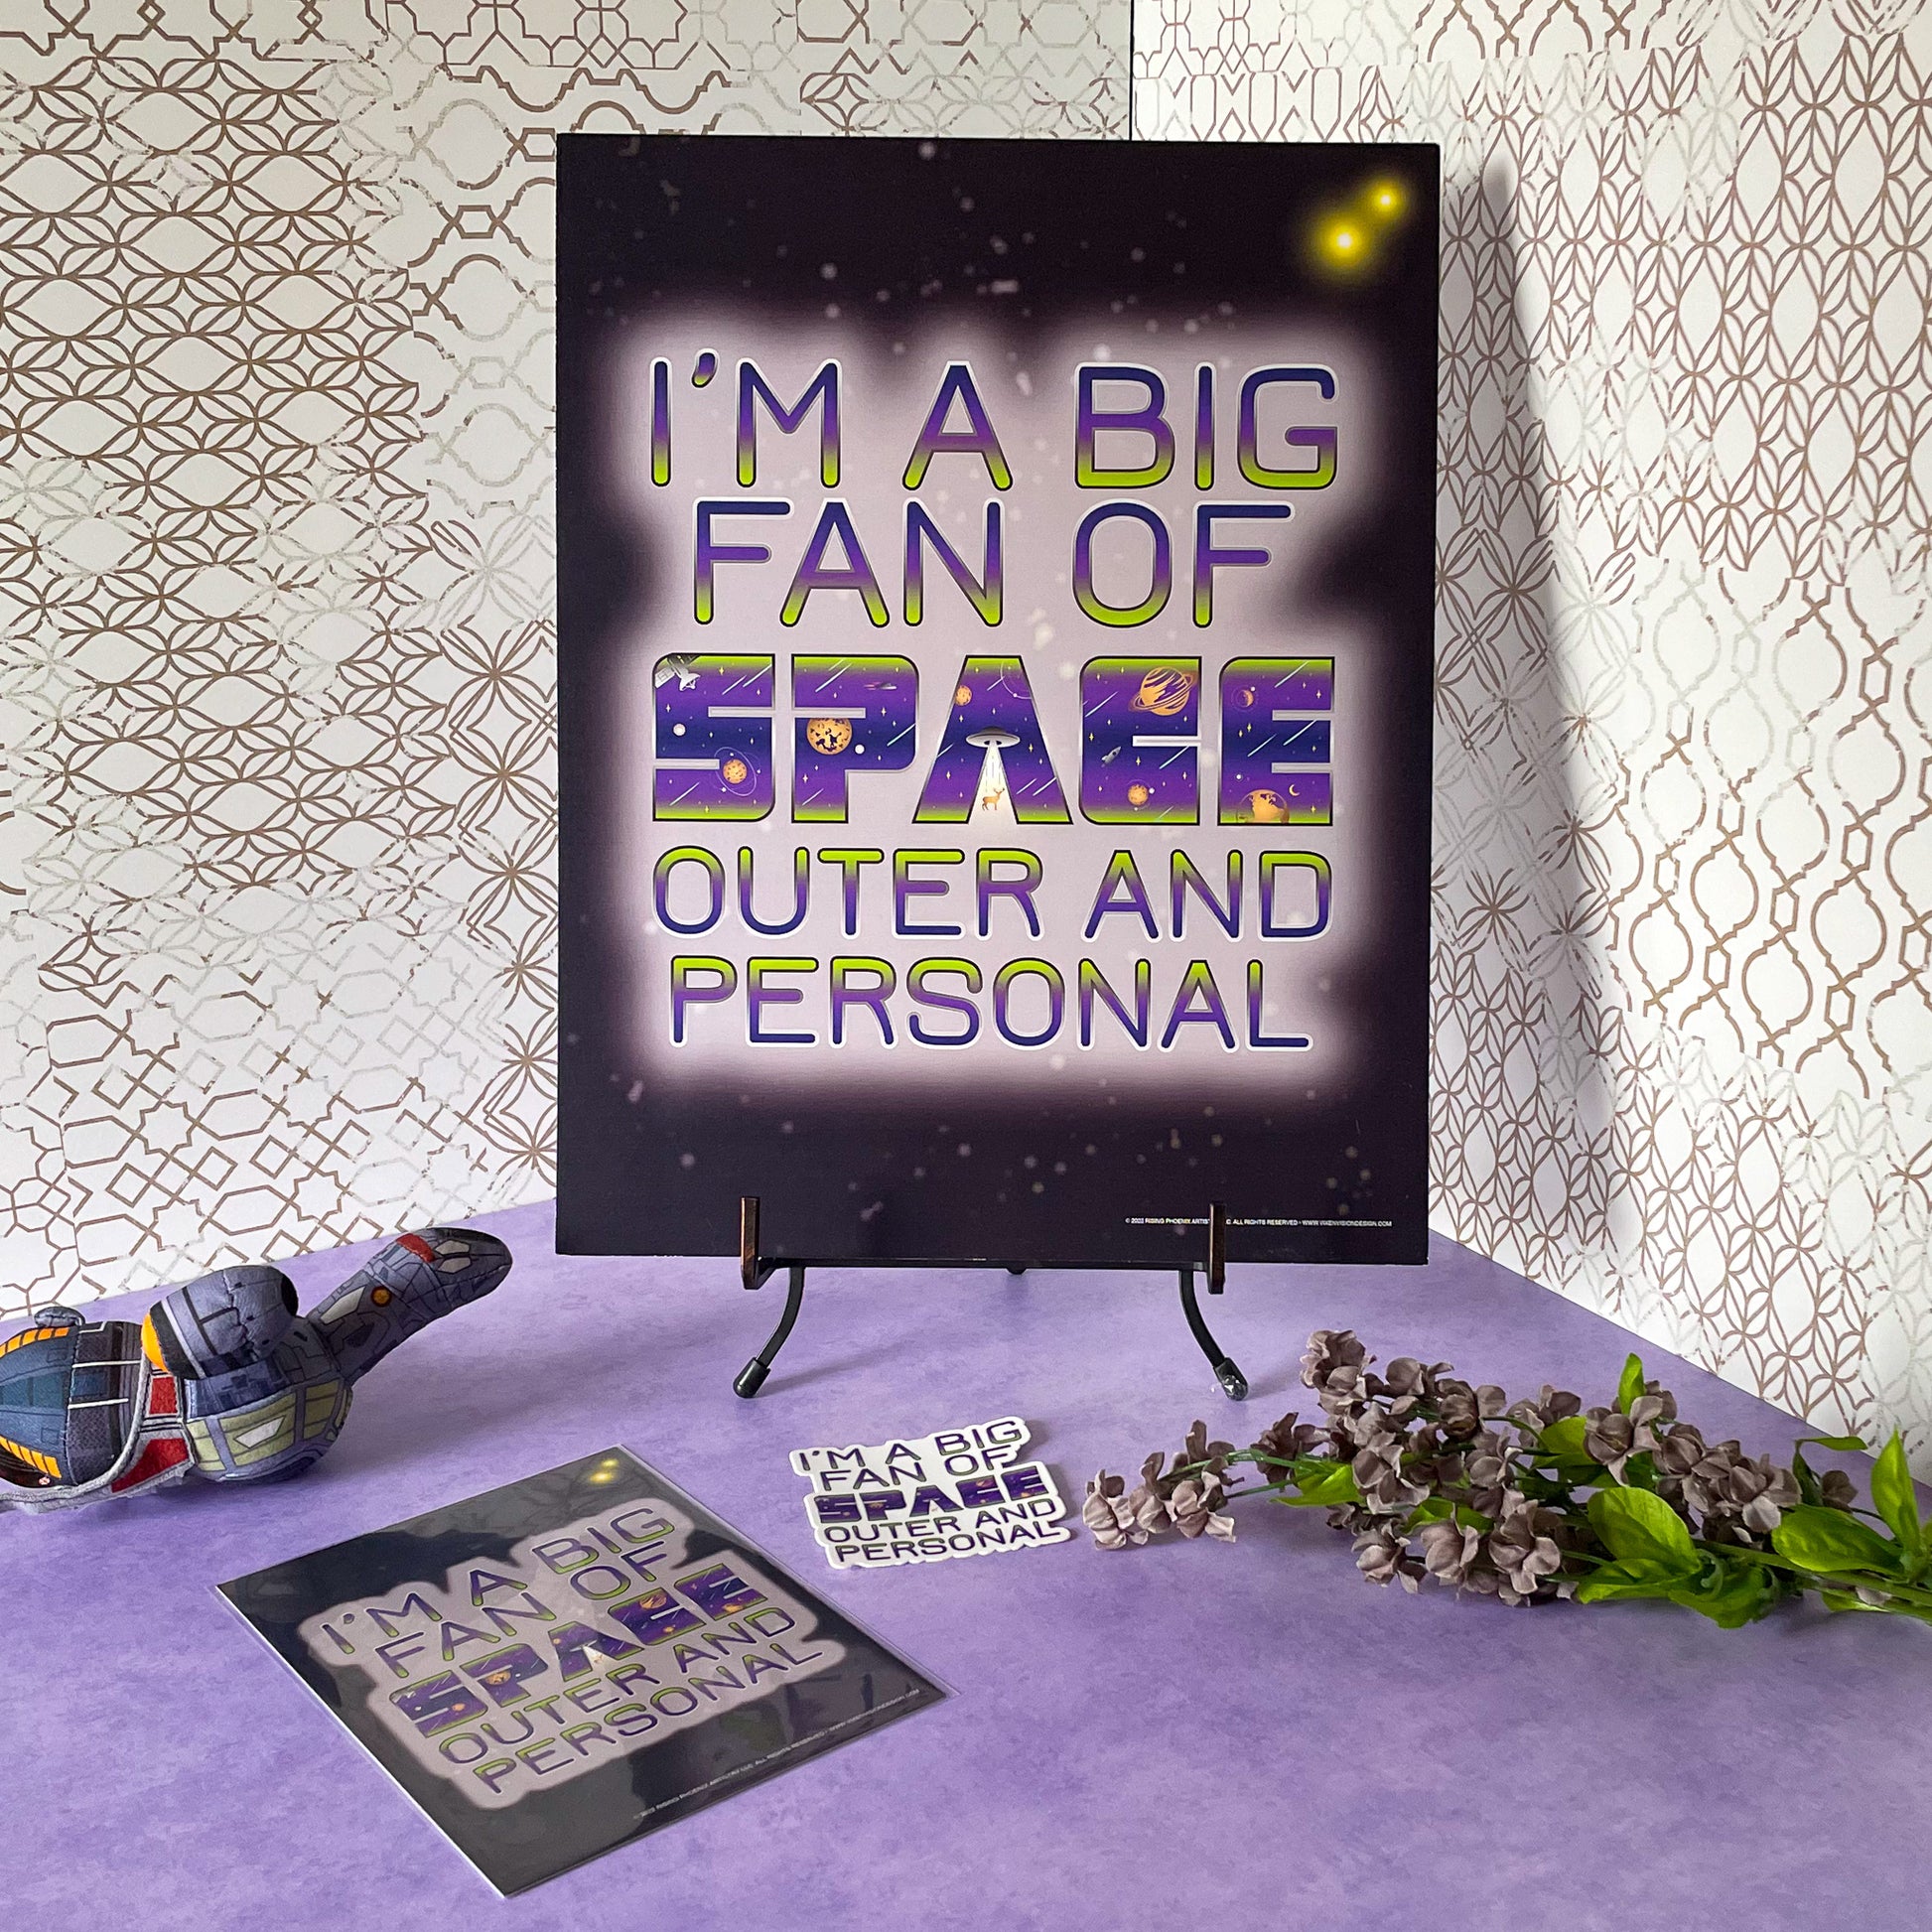 Big Fan of Space - Outer and Personal 11x14 Art Poster on stand with art card and sticker